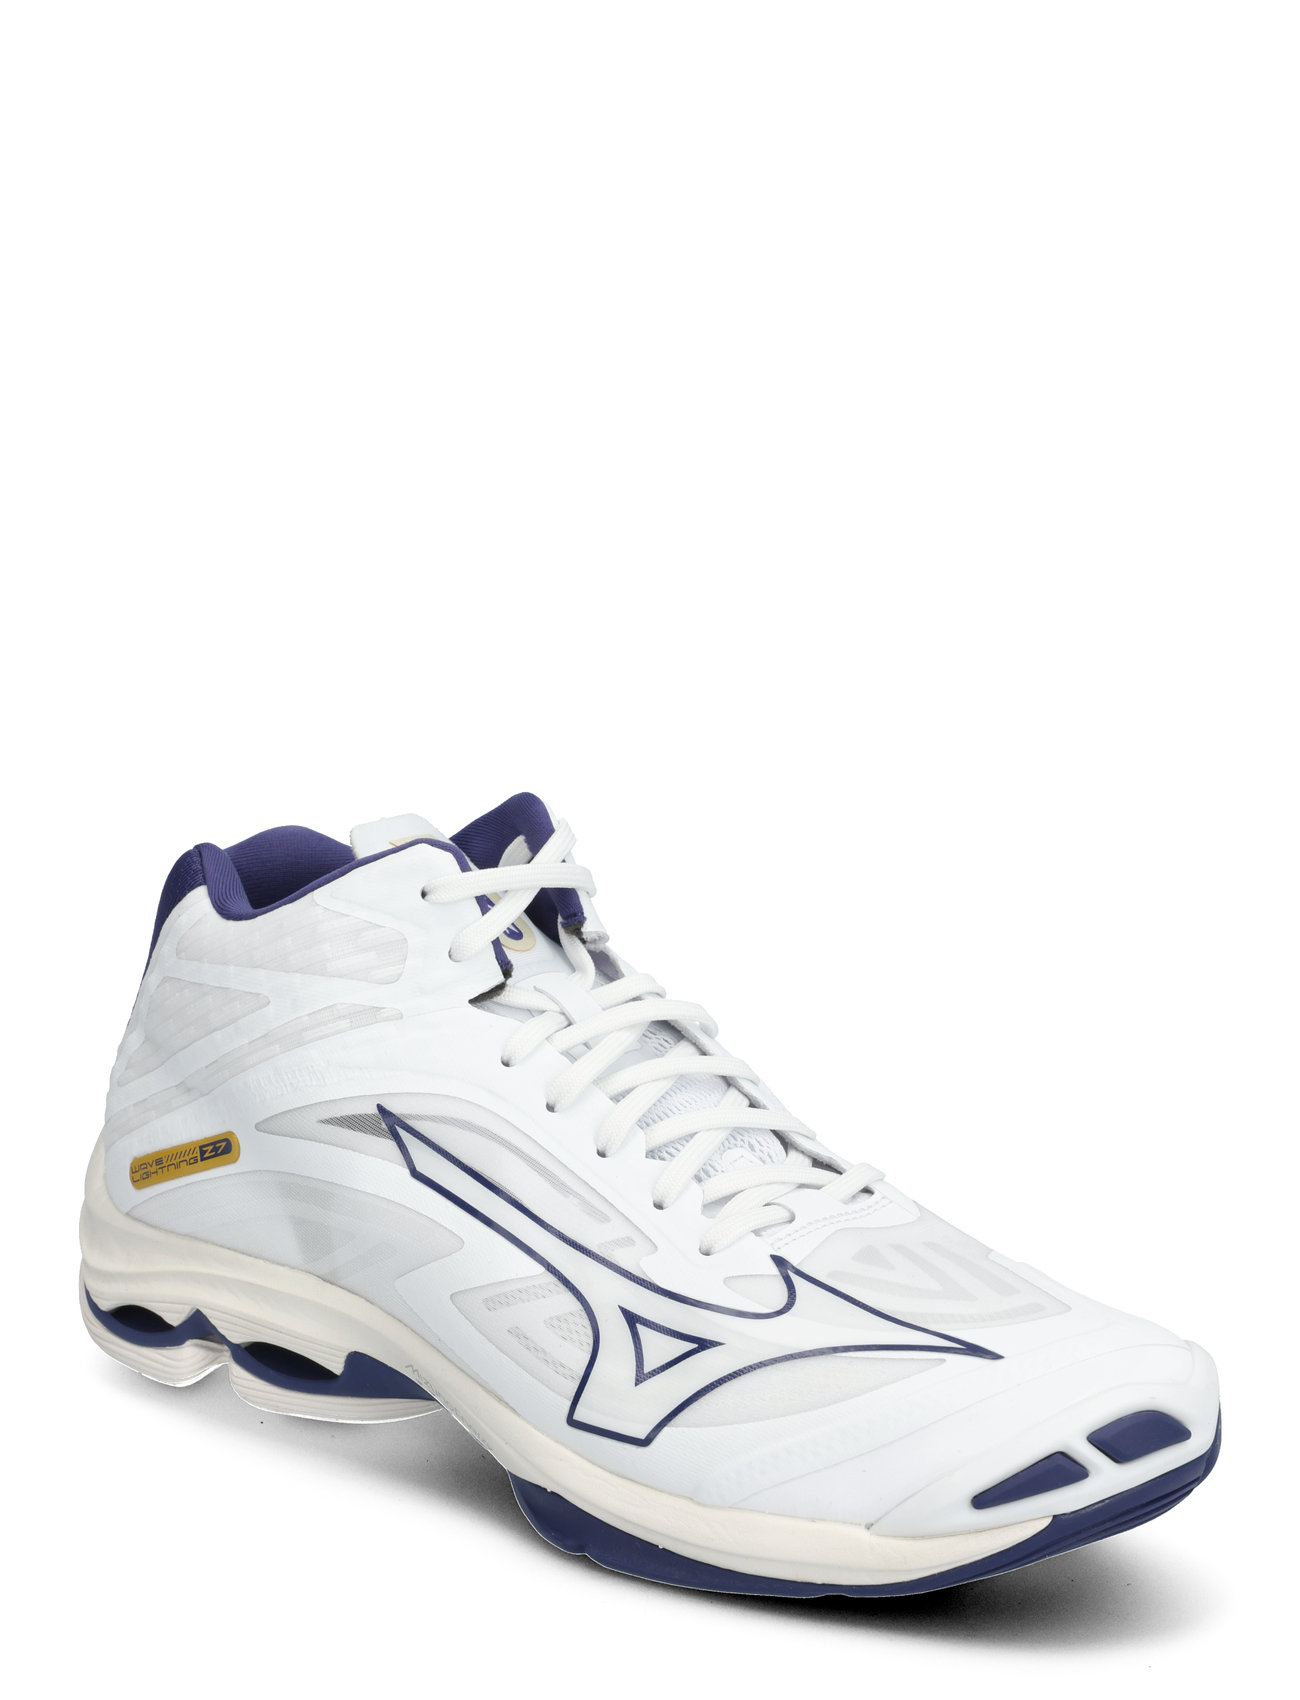 Wave Lightning Z7Mid Sport Sport Shoes Indoor Sports Shoes White Mizuno